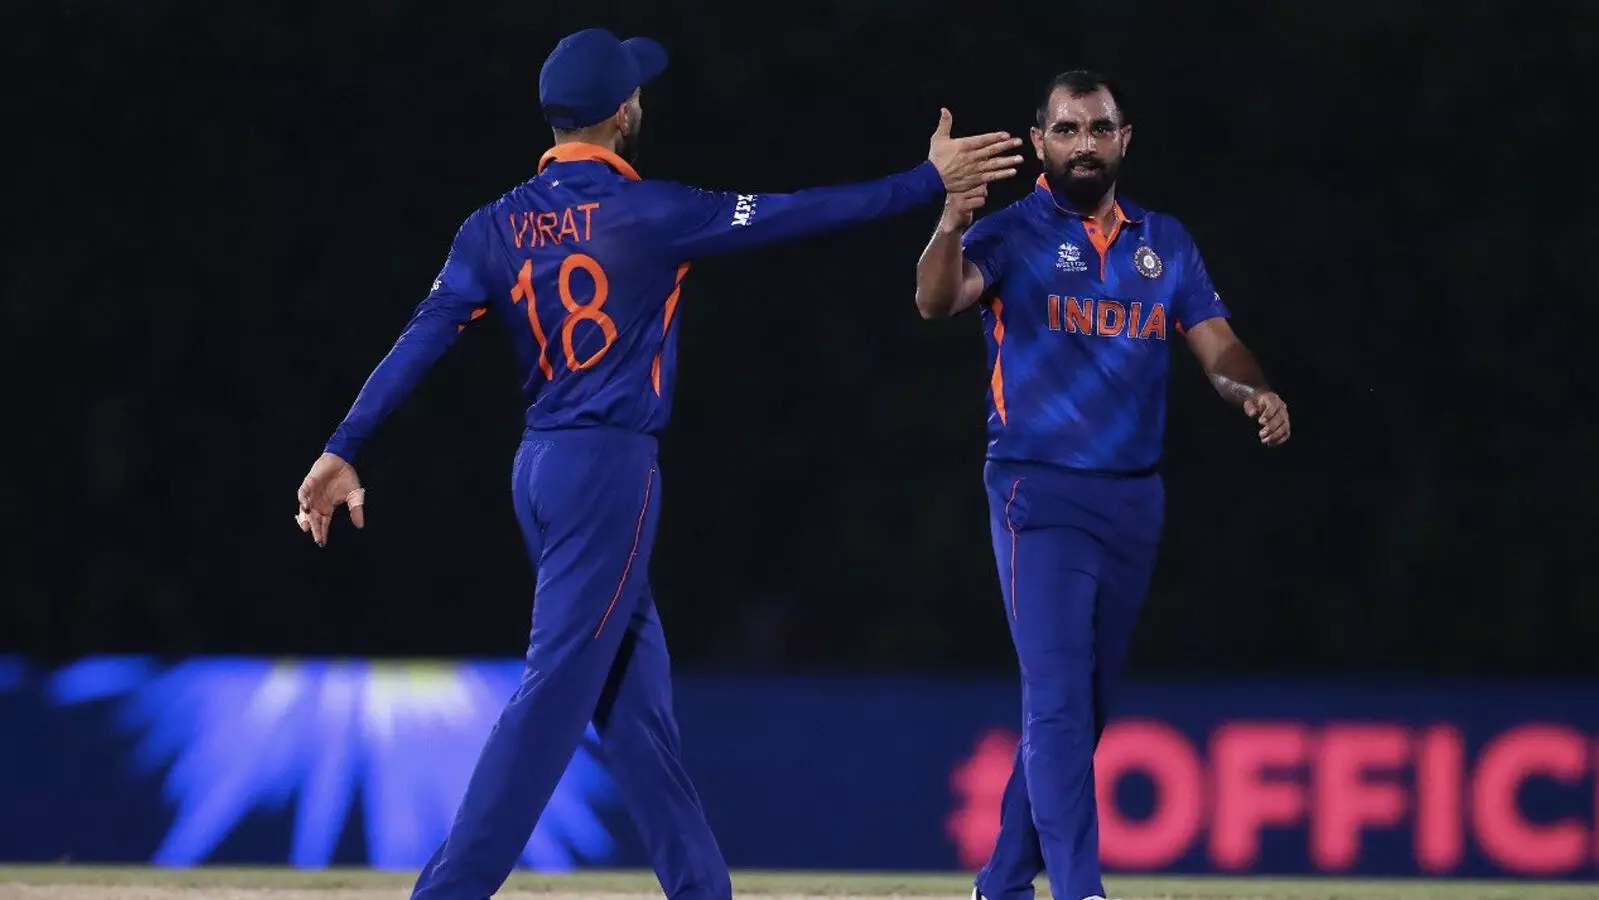 T20 World Cup Online attack on Shami shocking, says Virender Sehwag